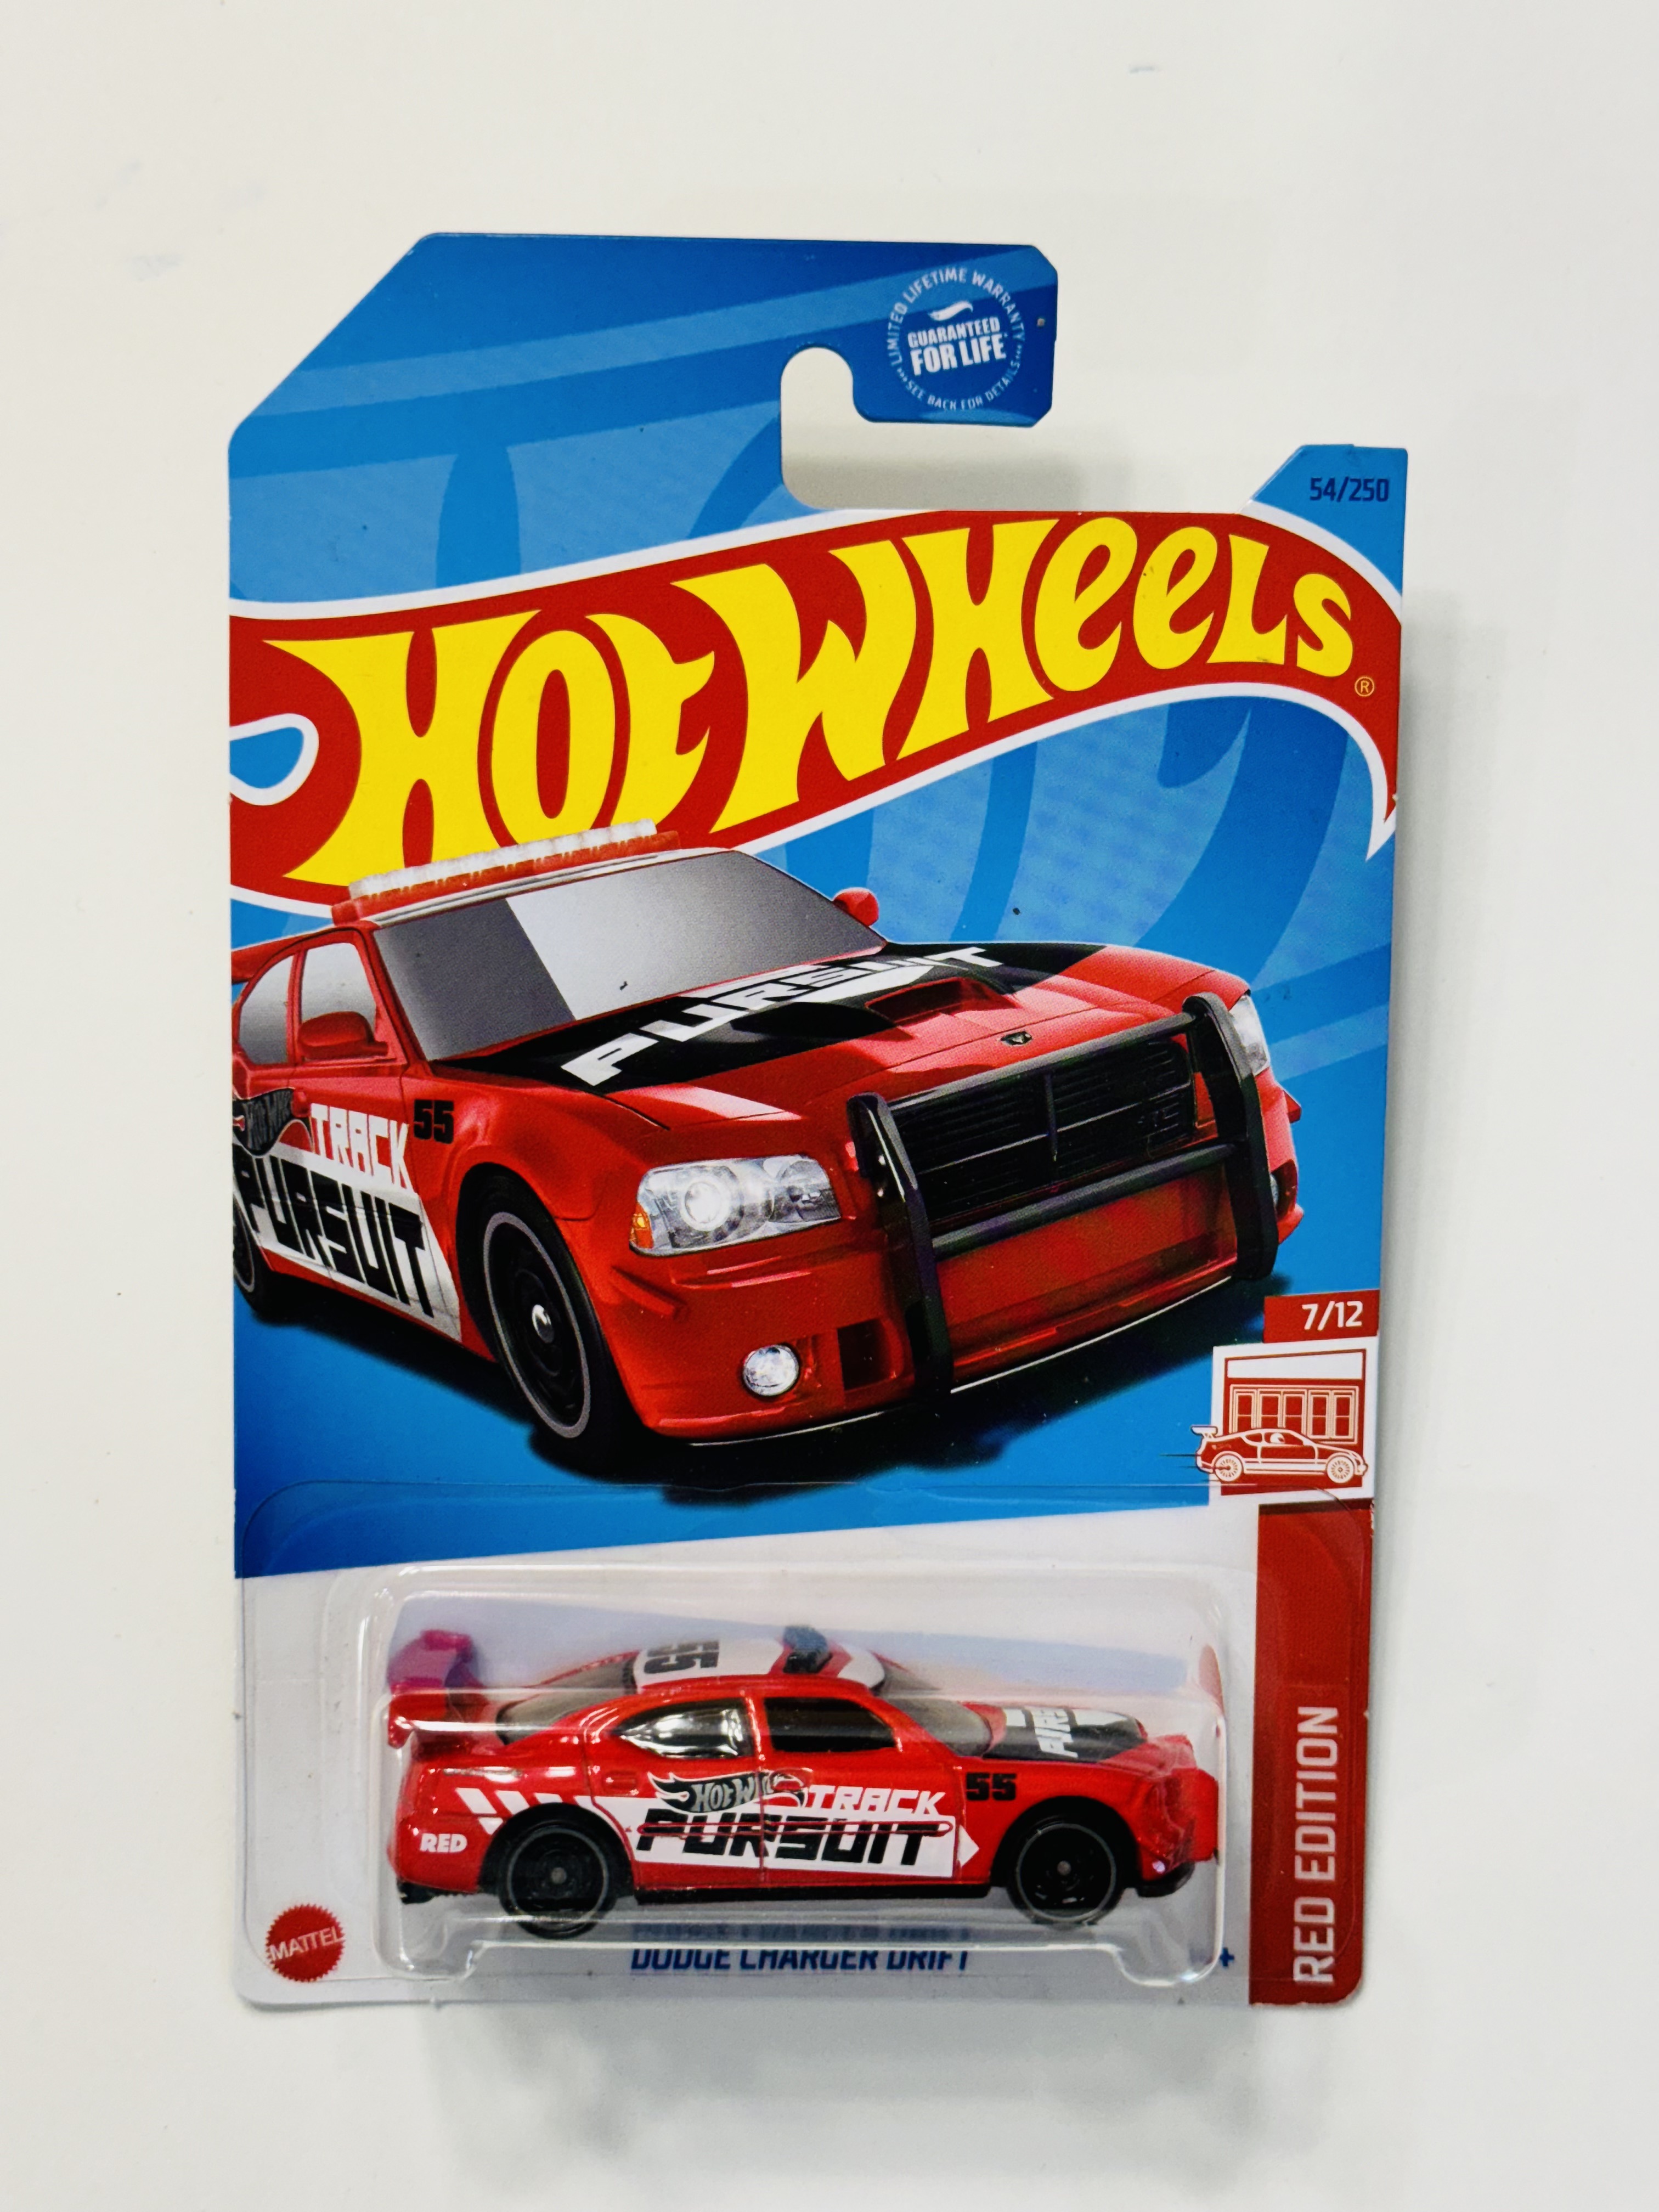 Hot Wheels #54 Dodge Charger Drift - Exclusive Target Red Edition